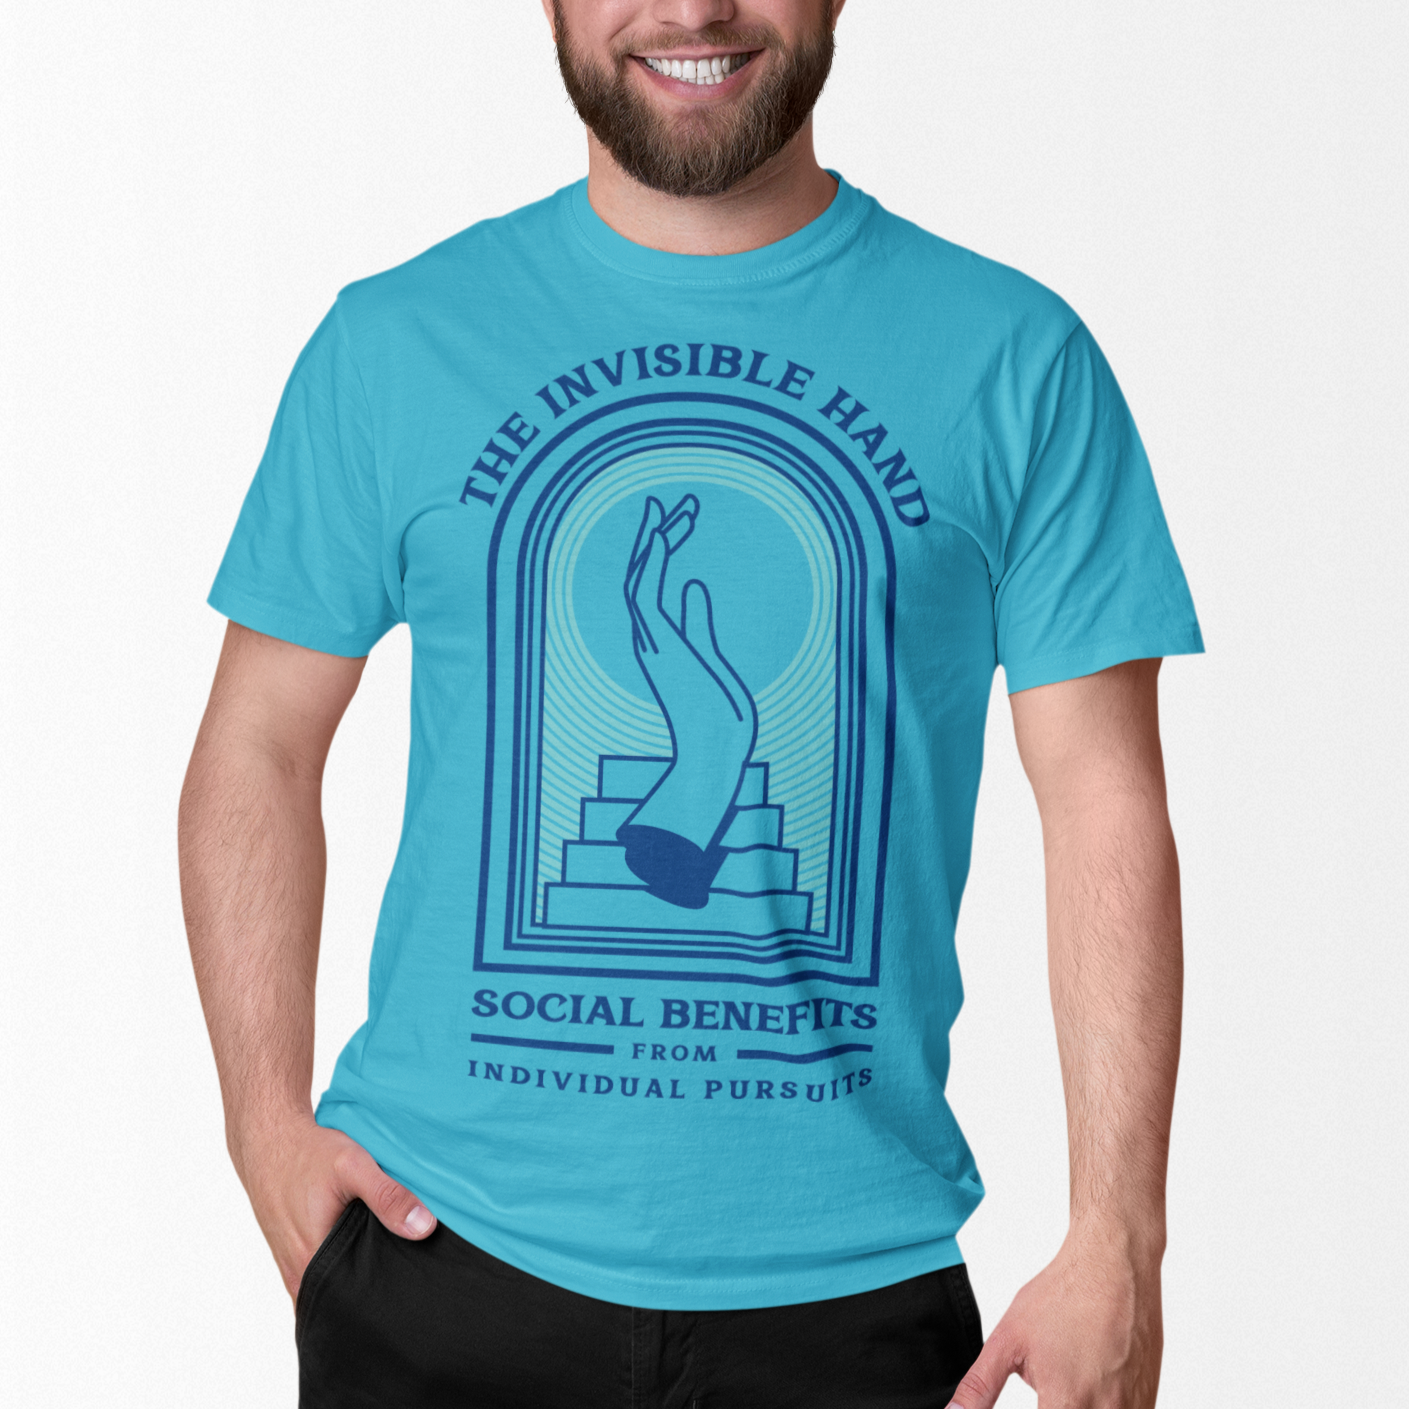 The Invisible Hand Short-Sleeve Unisex T-Shirt